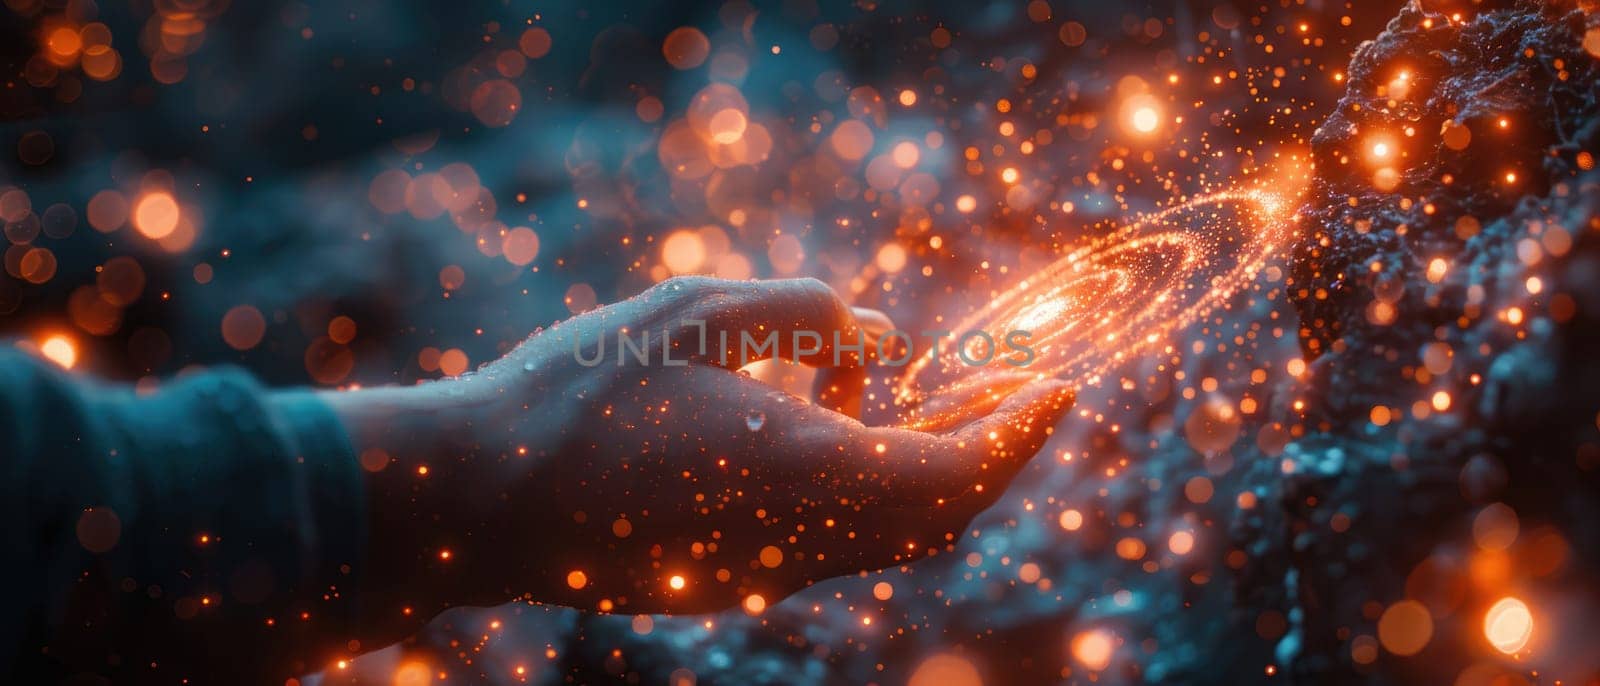 A hand is reaching out to touch a glowing orb in the sky by AI generated image.